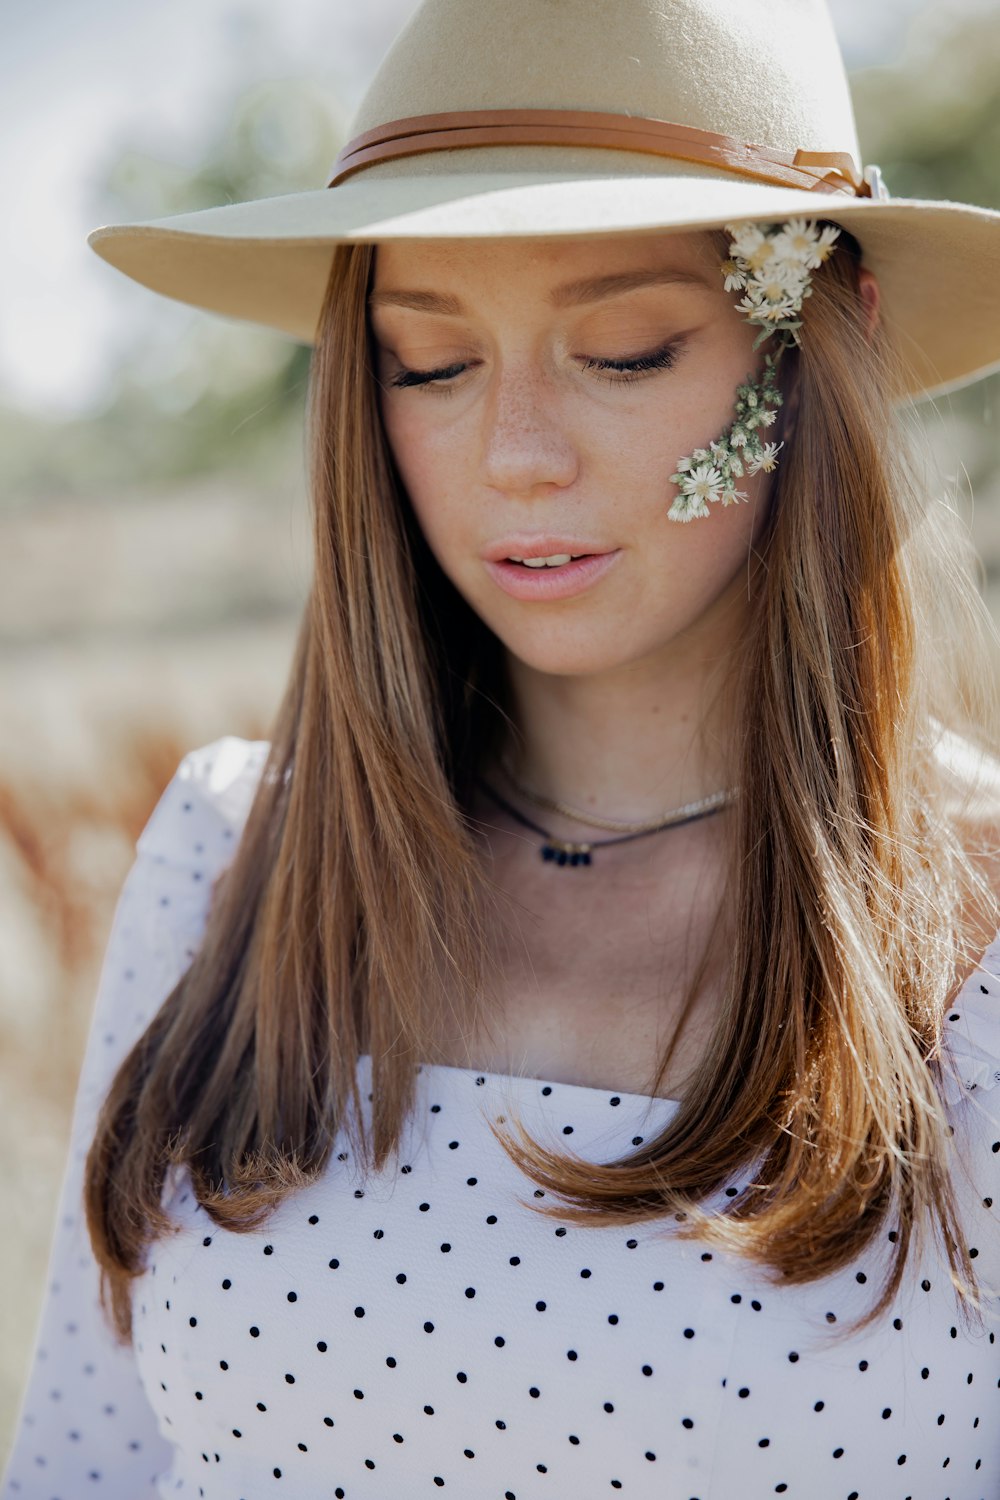 woman in white and black polka dot shirt wearing white floral headband